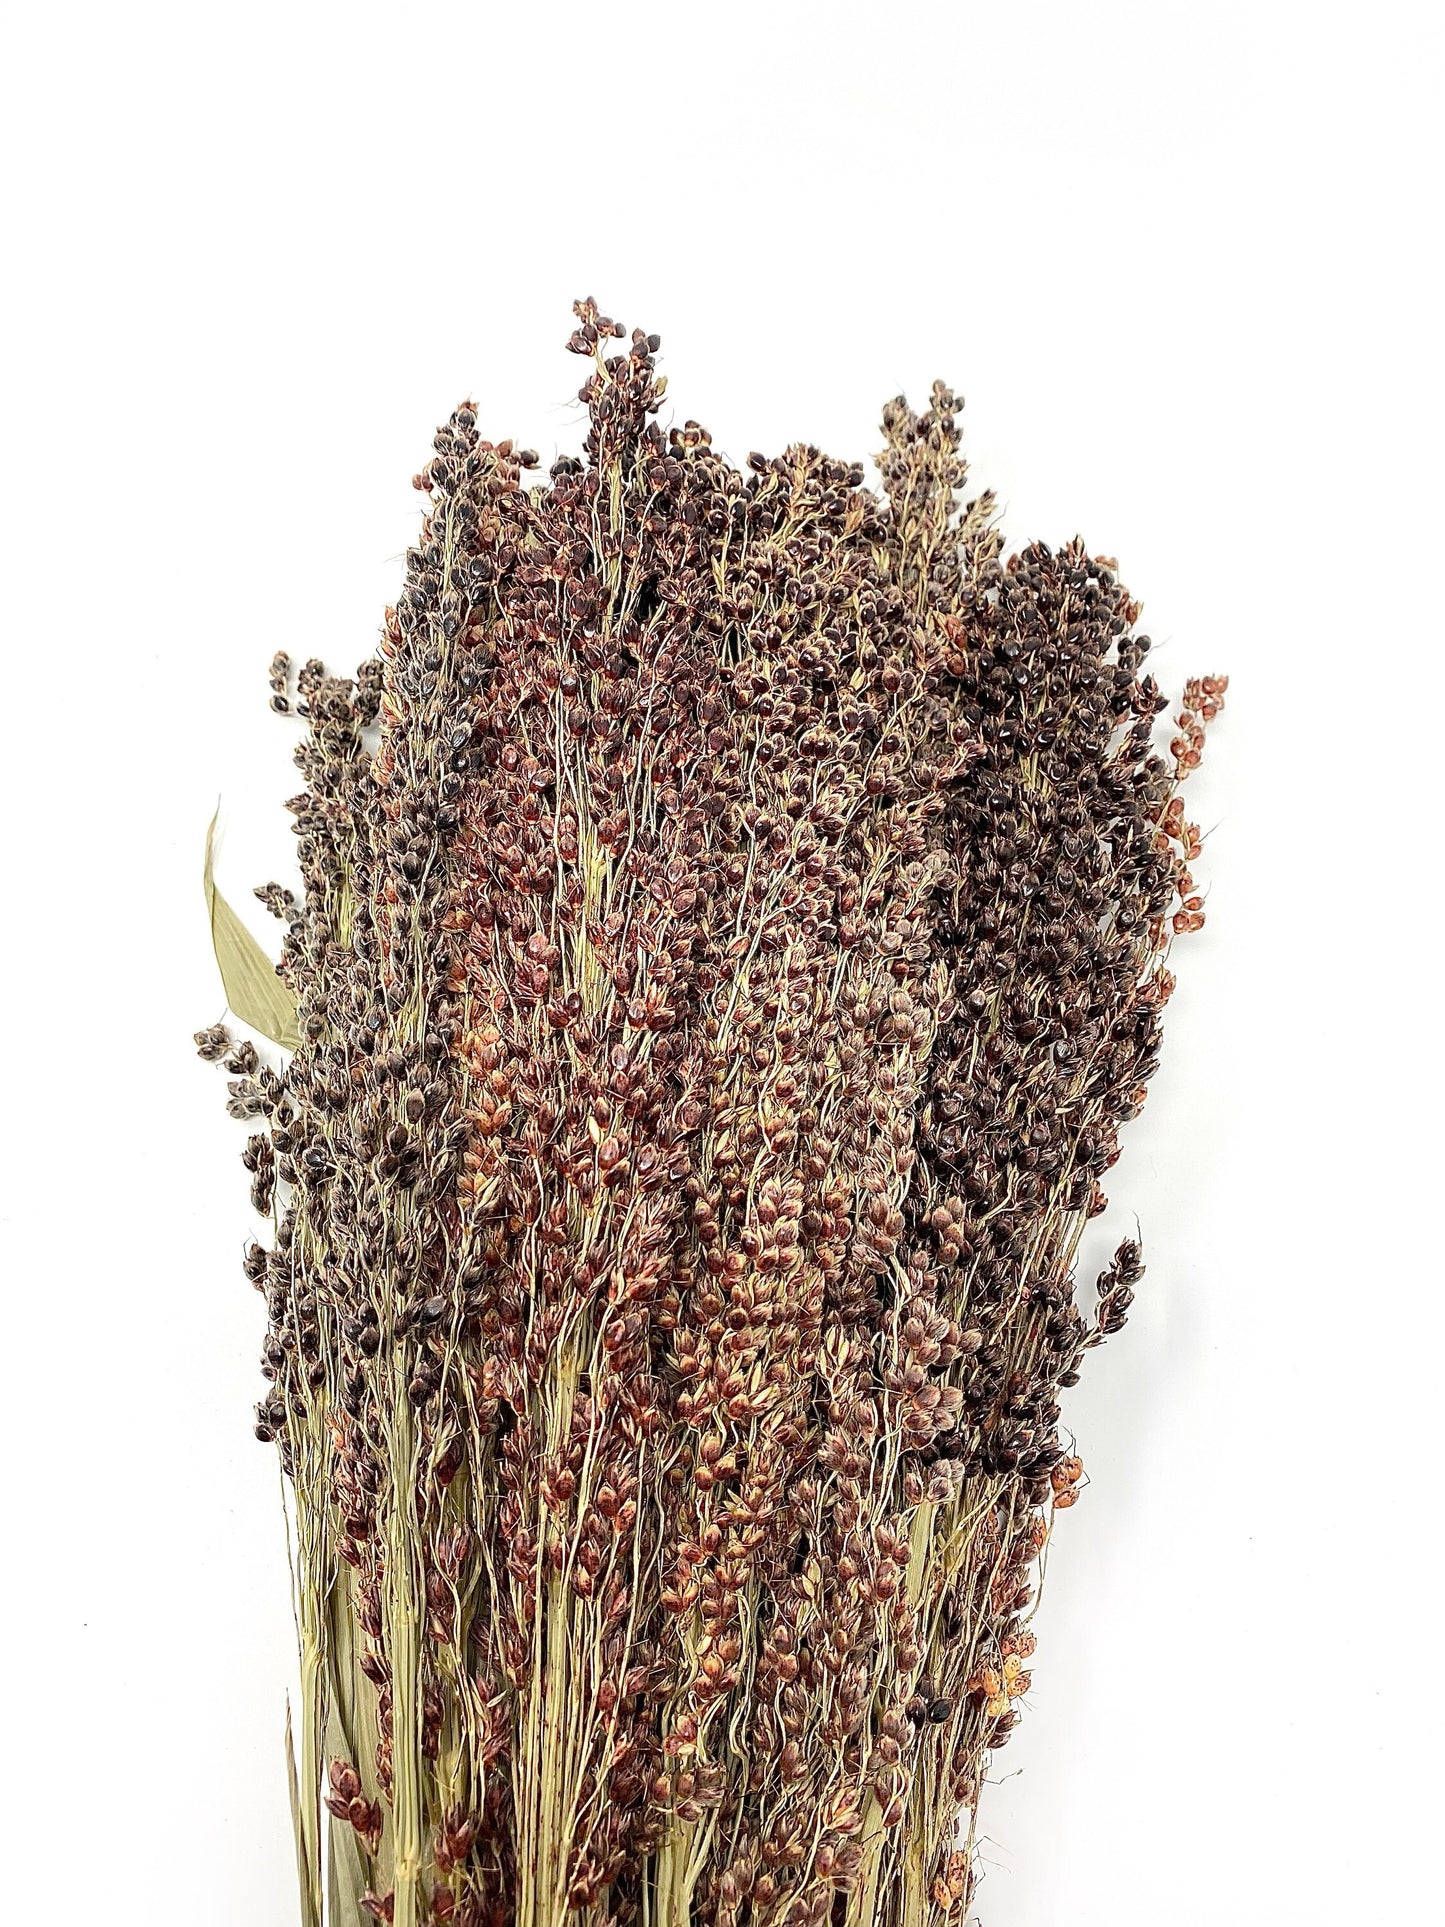 Black Sorghum, Preserved Wheat, Preserved Flowers, Dried Wheat, House Decoration, Wedding Flowers, Country Style, Black, Wheats and Grass